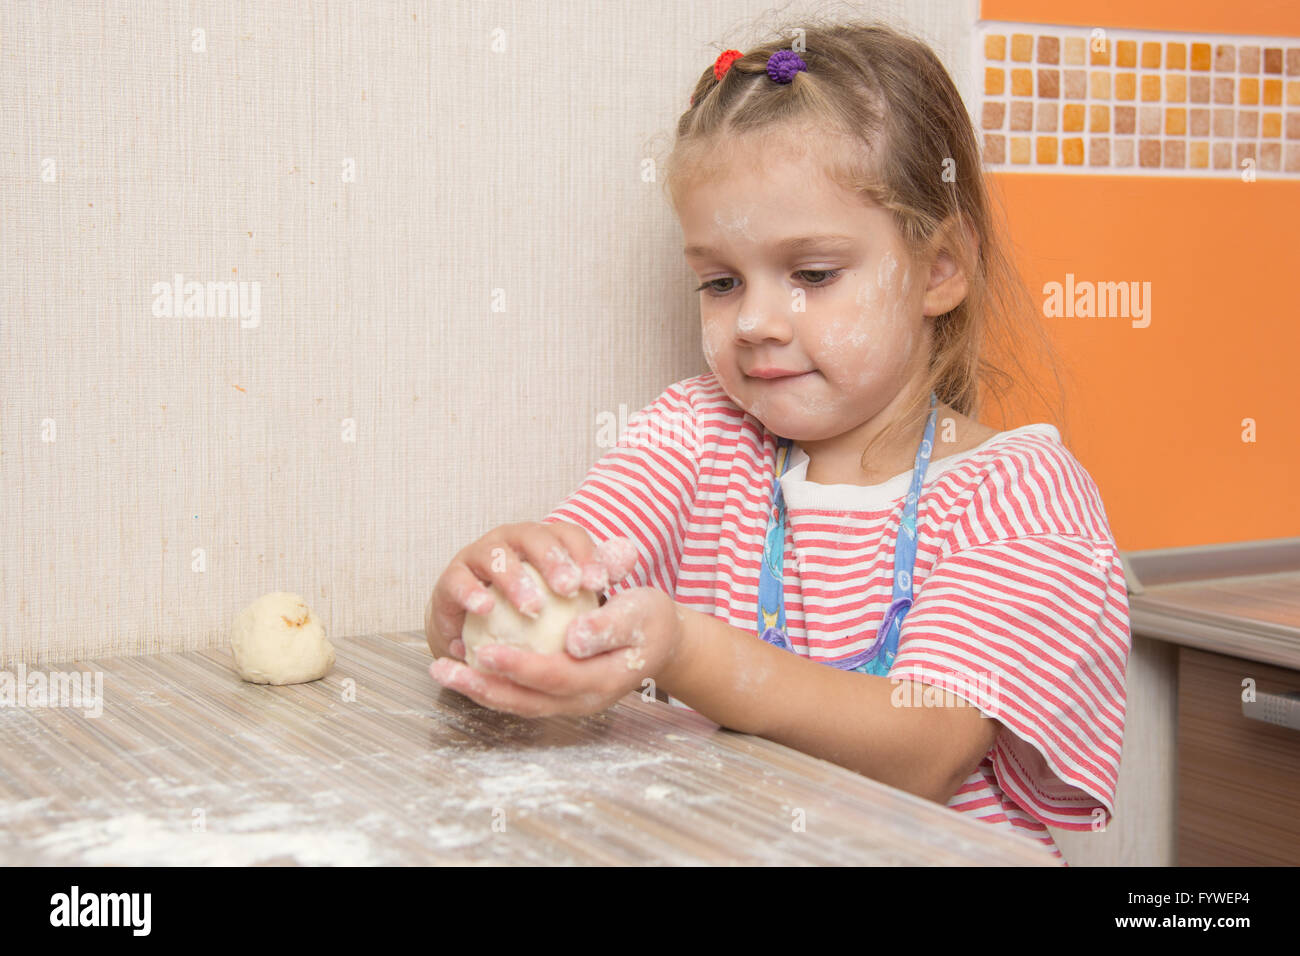 Girl sculpts a pie at the kitchen table Stock Photo